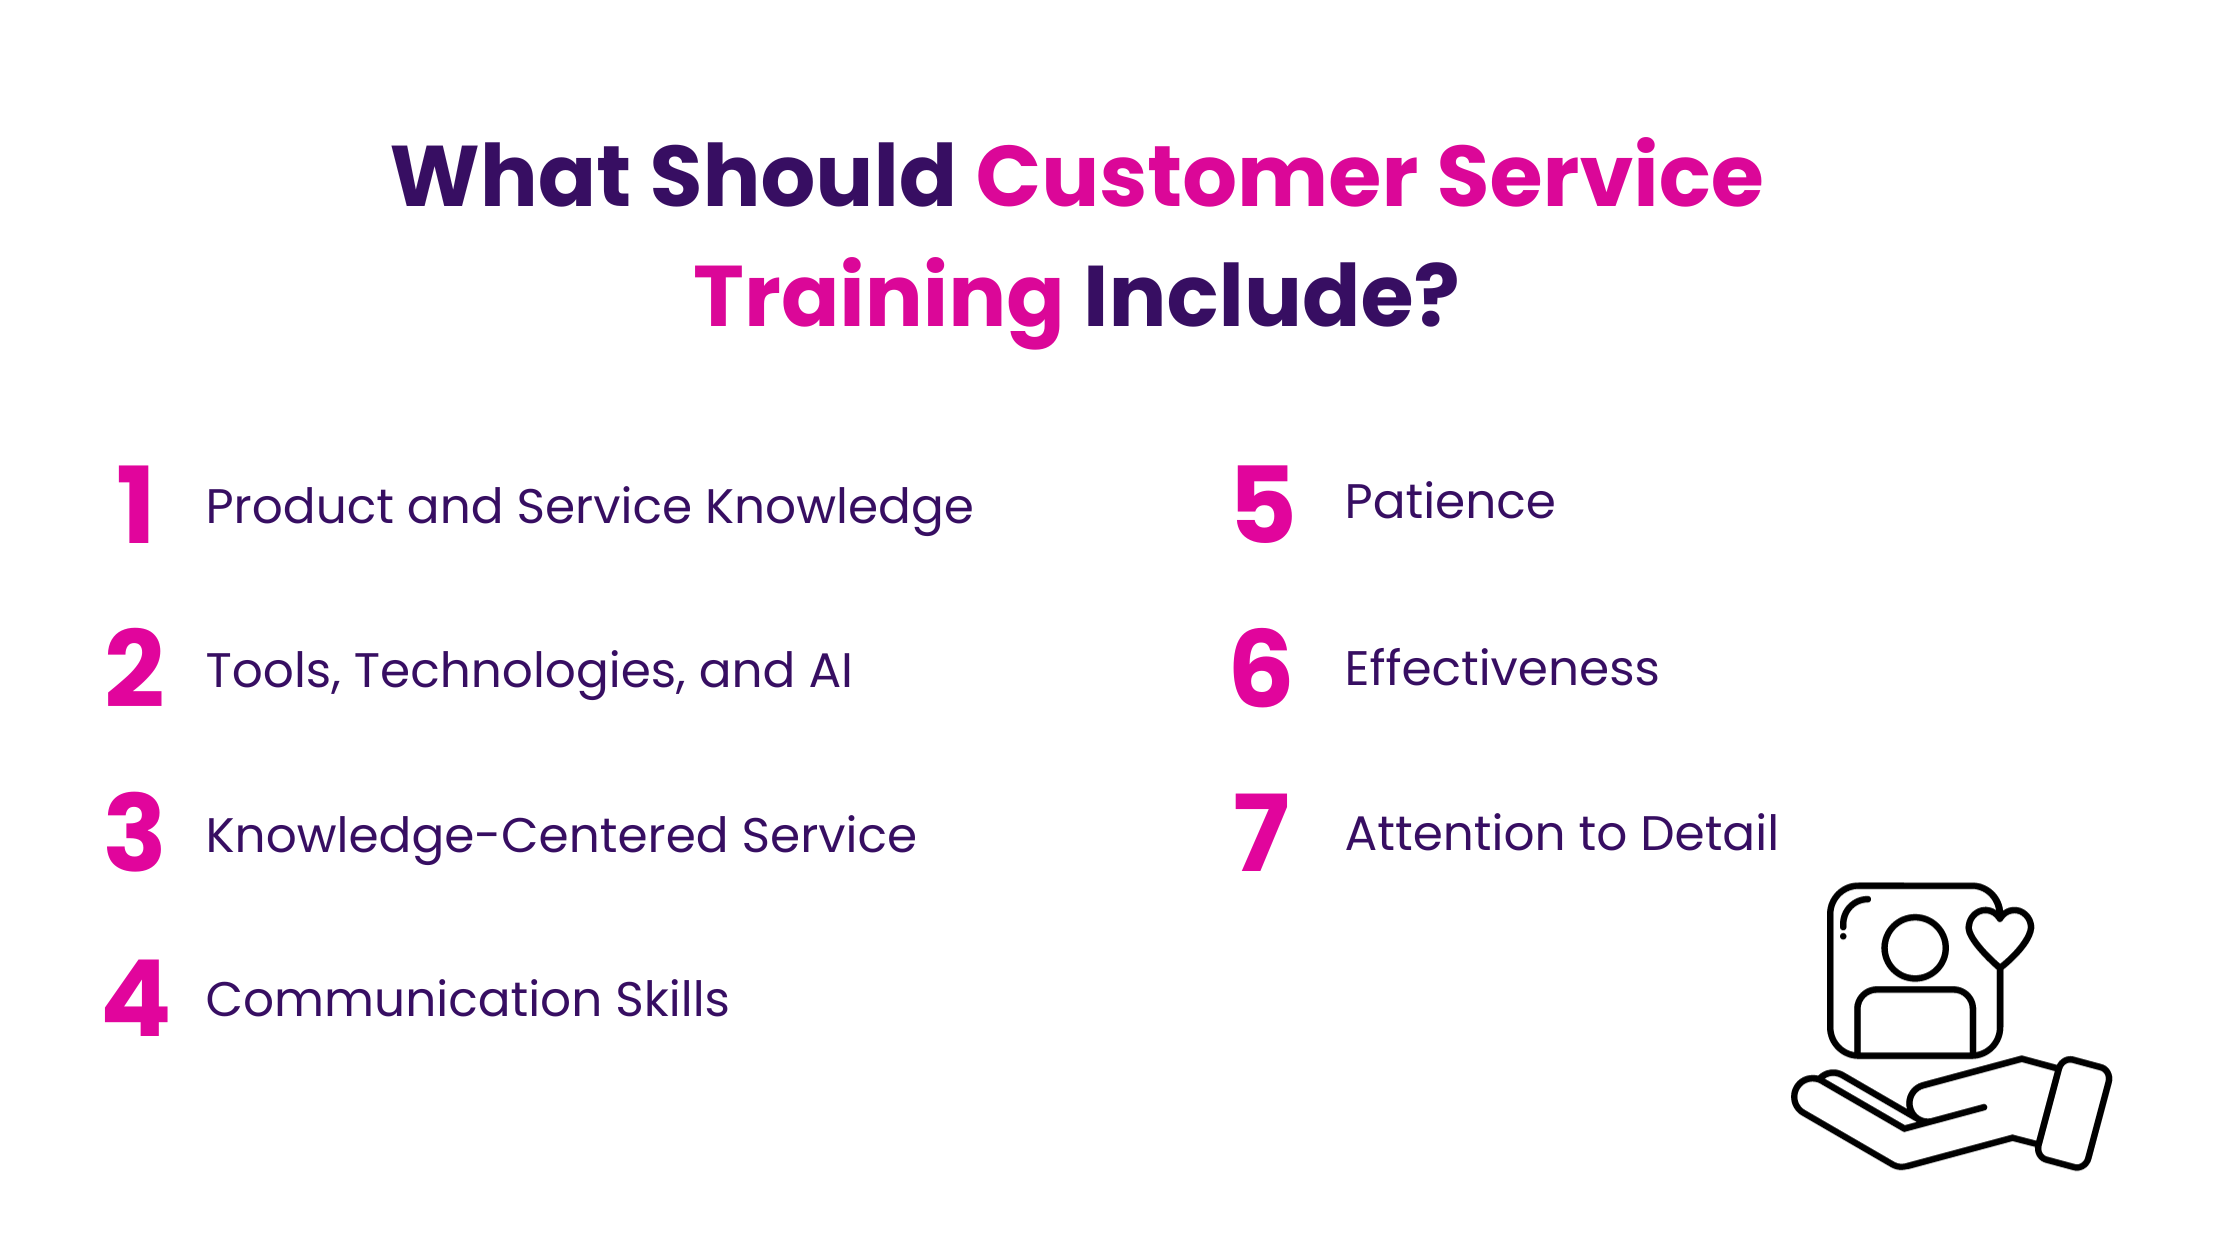 What Should Customer Service Training Include